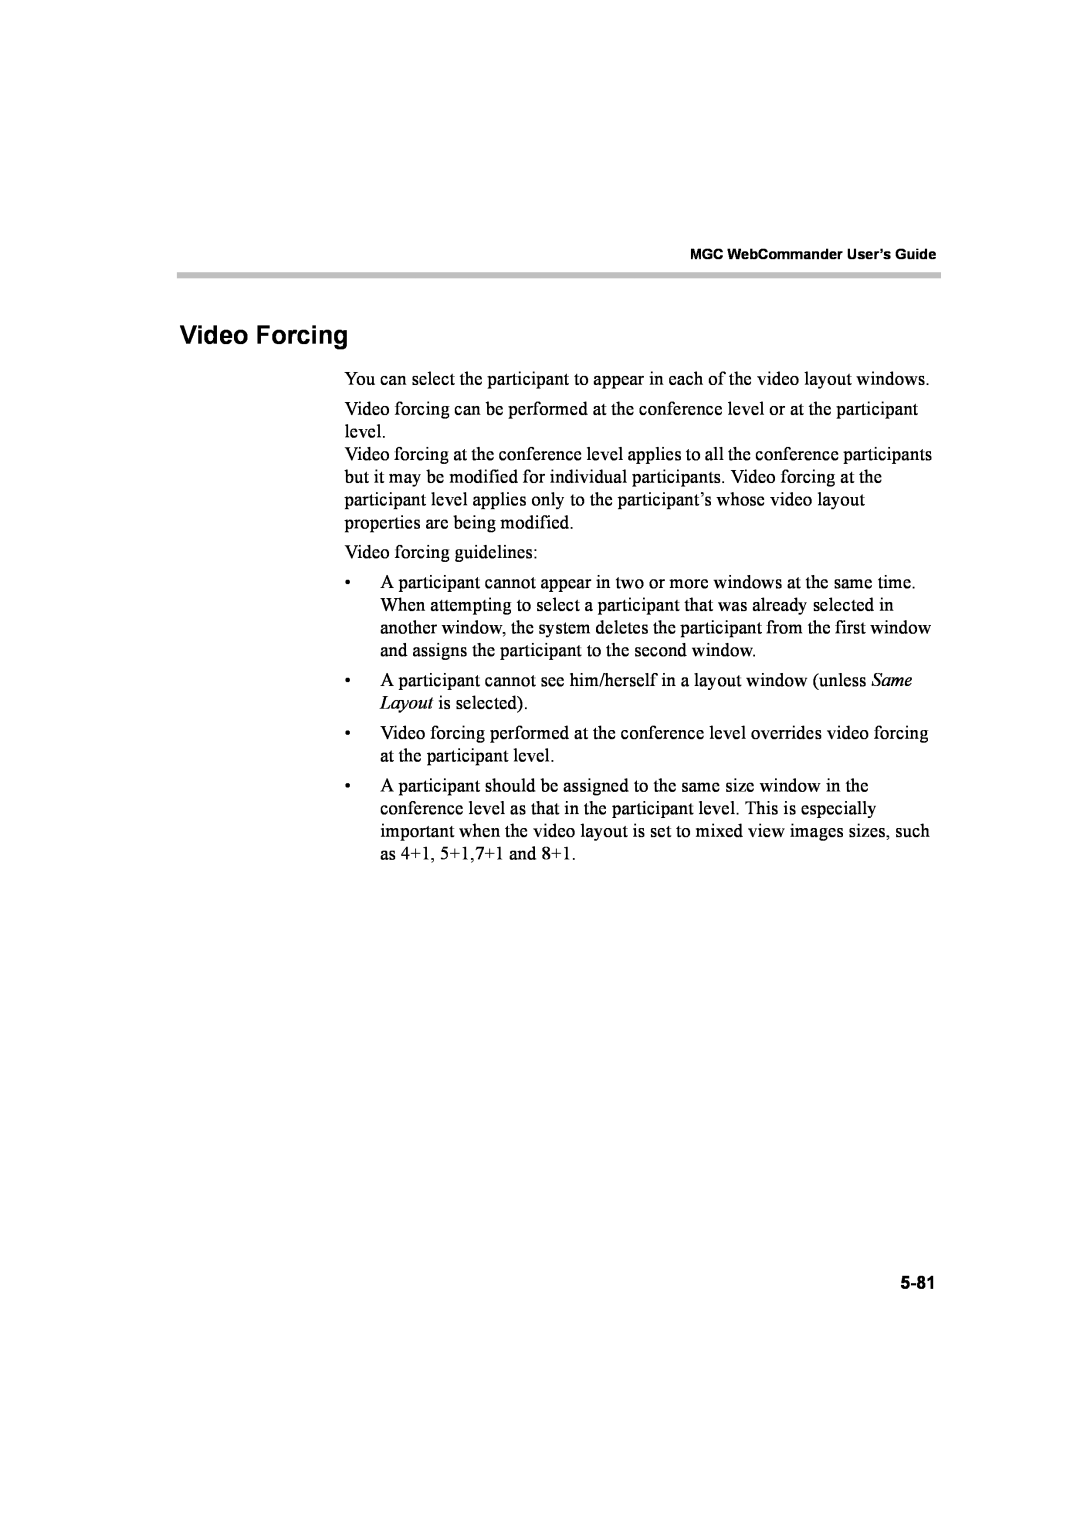 Polycom 8 manual Video Forcing 